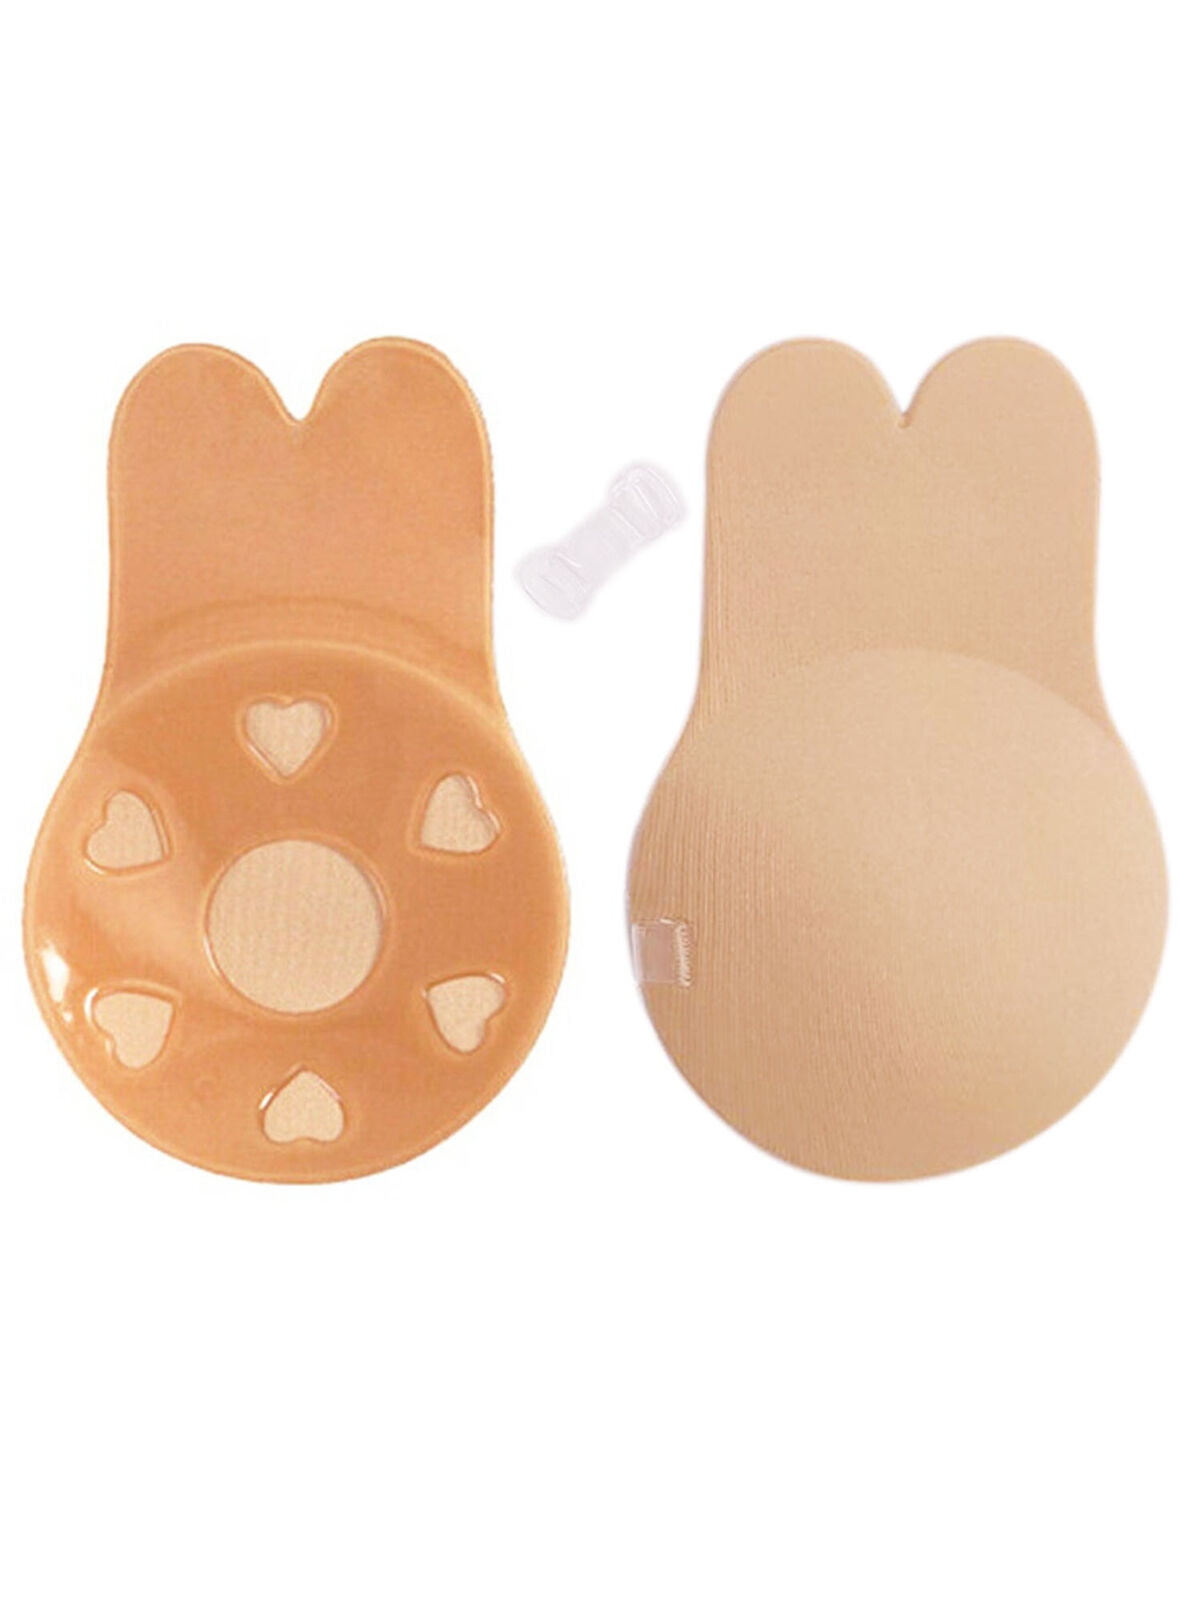 Bras Sticky Bra Silicone Magic Breast Lift Tape Sujetador Invisible Push Up  Strapless Self Adhesive Sexy Brassiere Femme Bh From Richina, $45.99